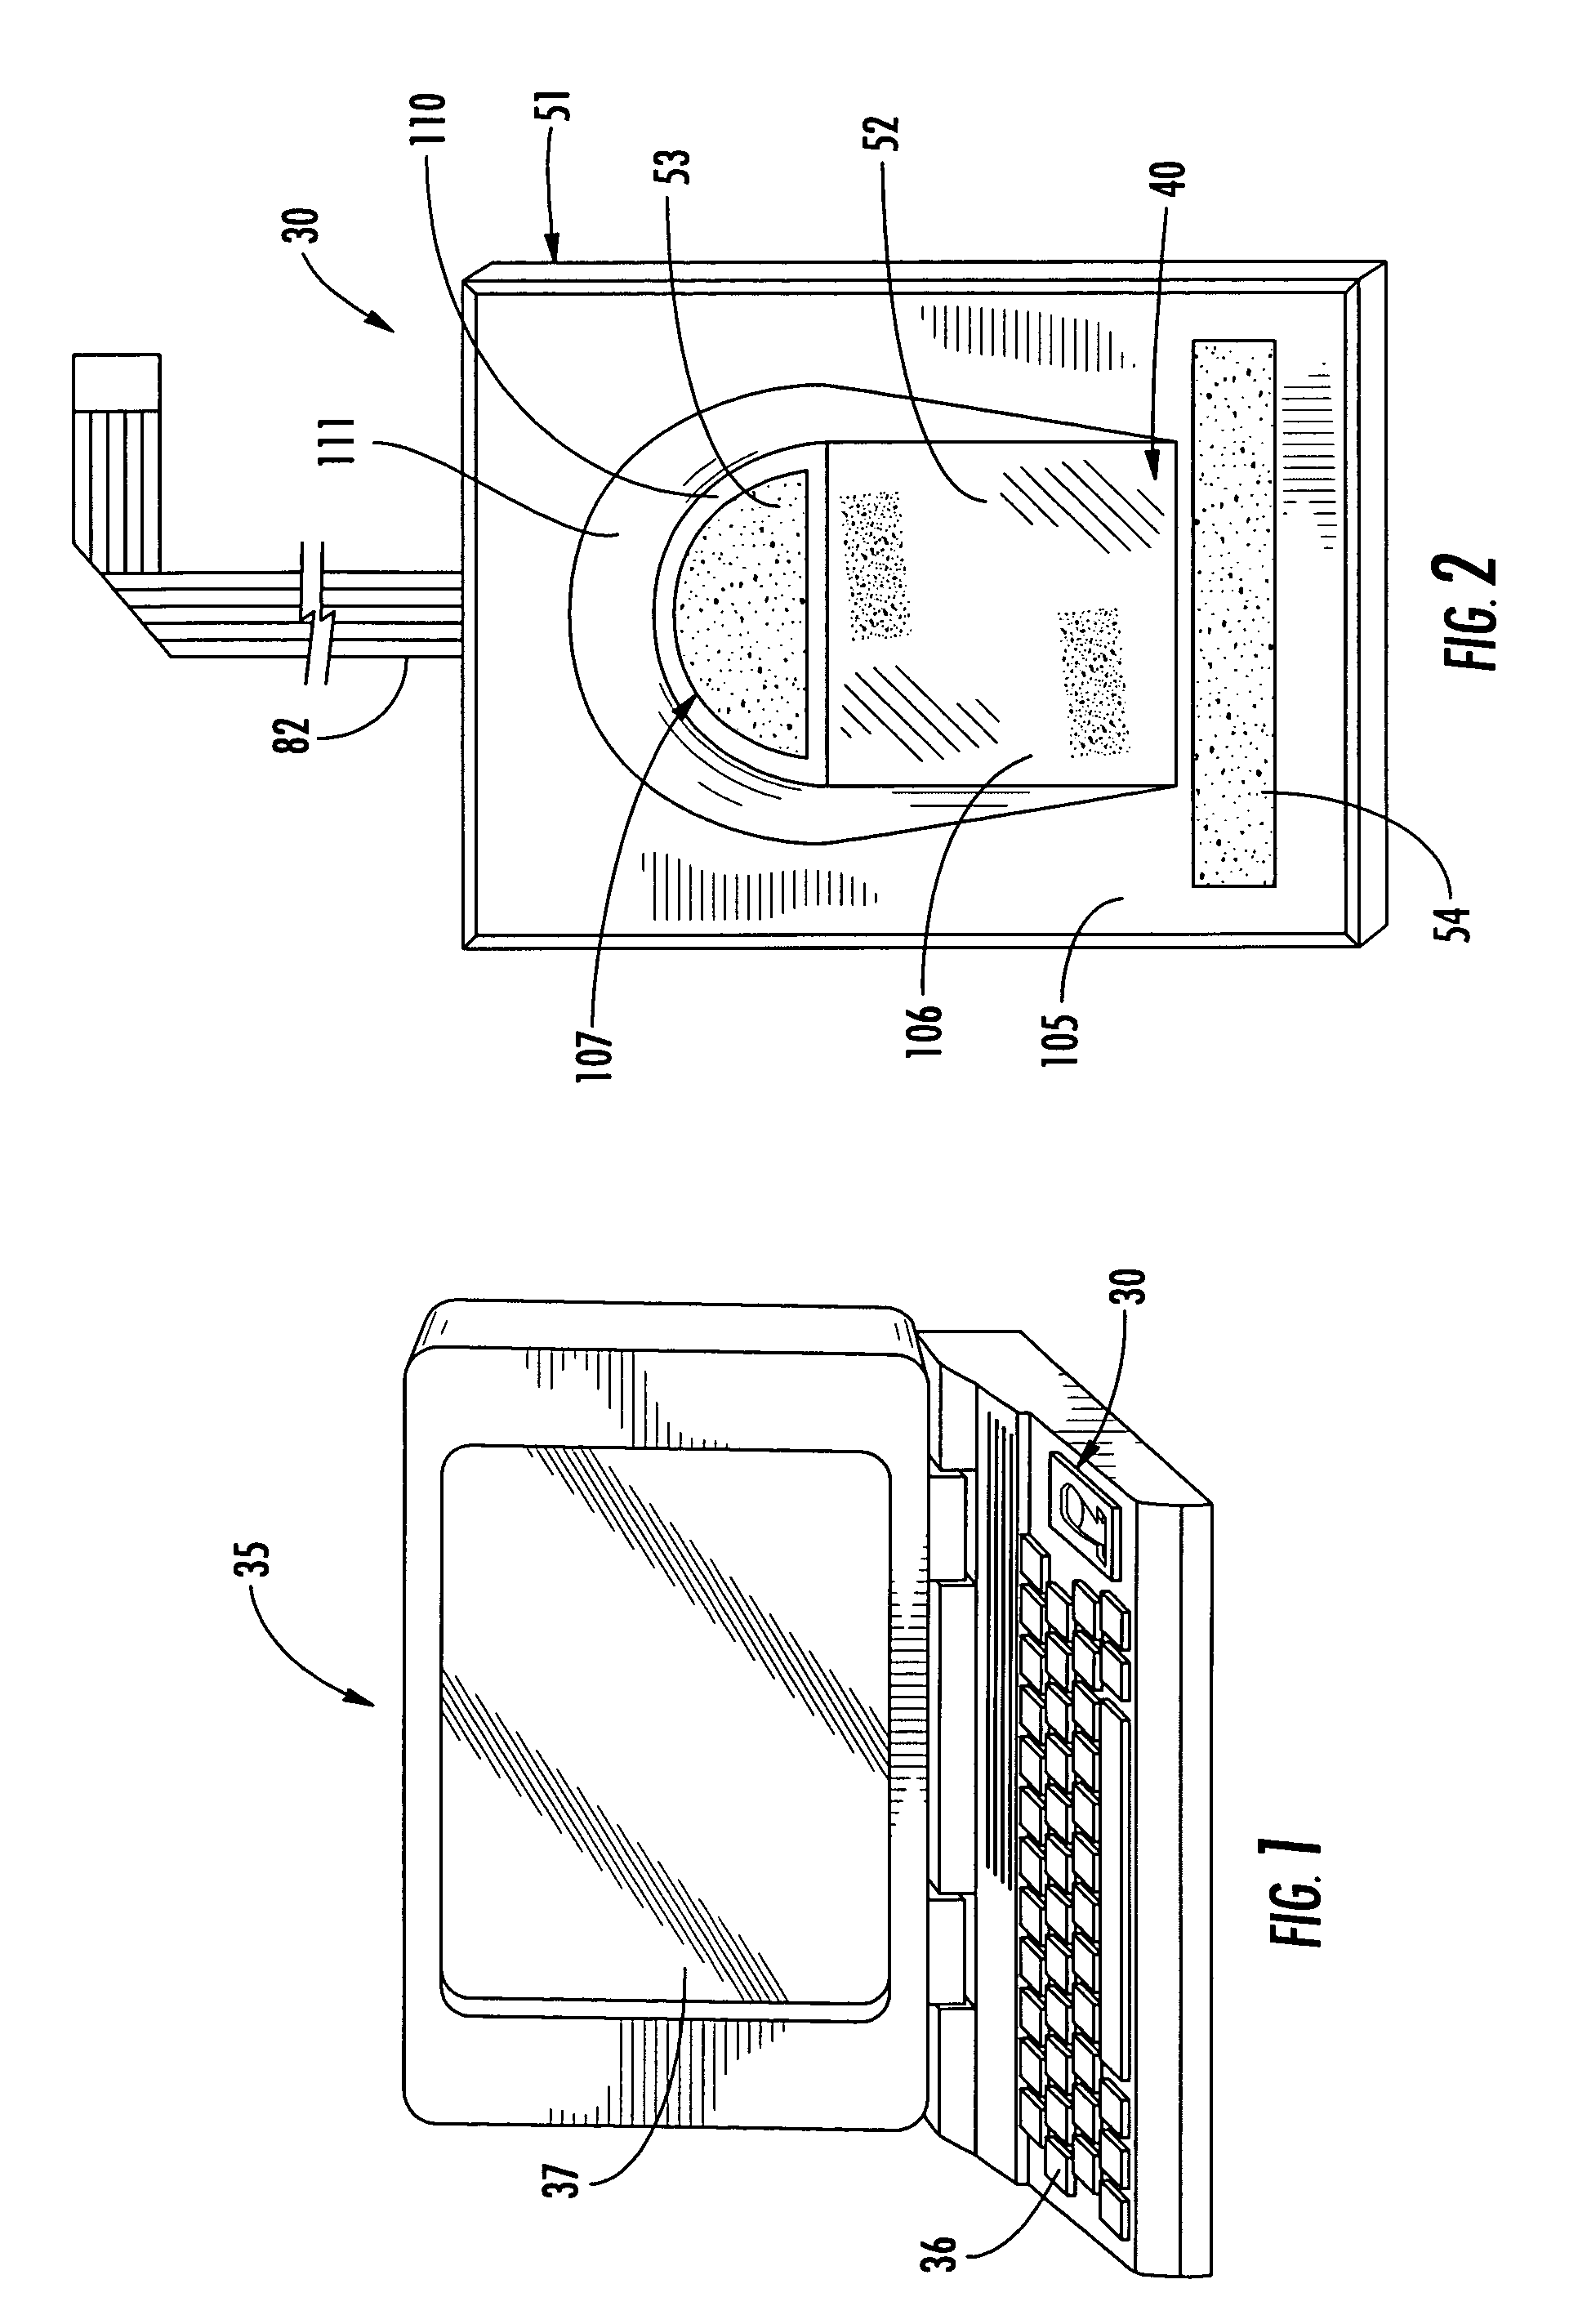 Fingerprint sensor package including flexible circuit substrate and associated methods